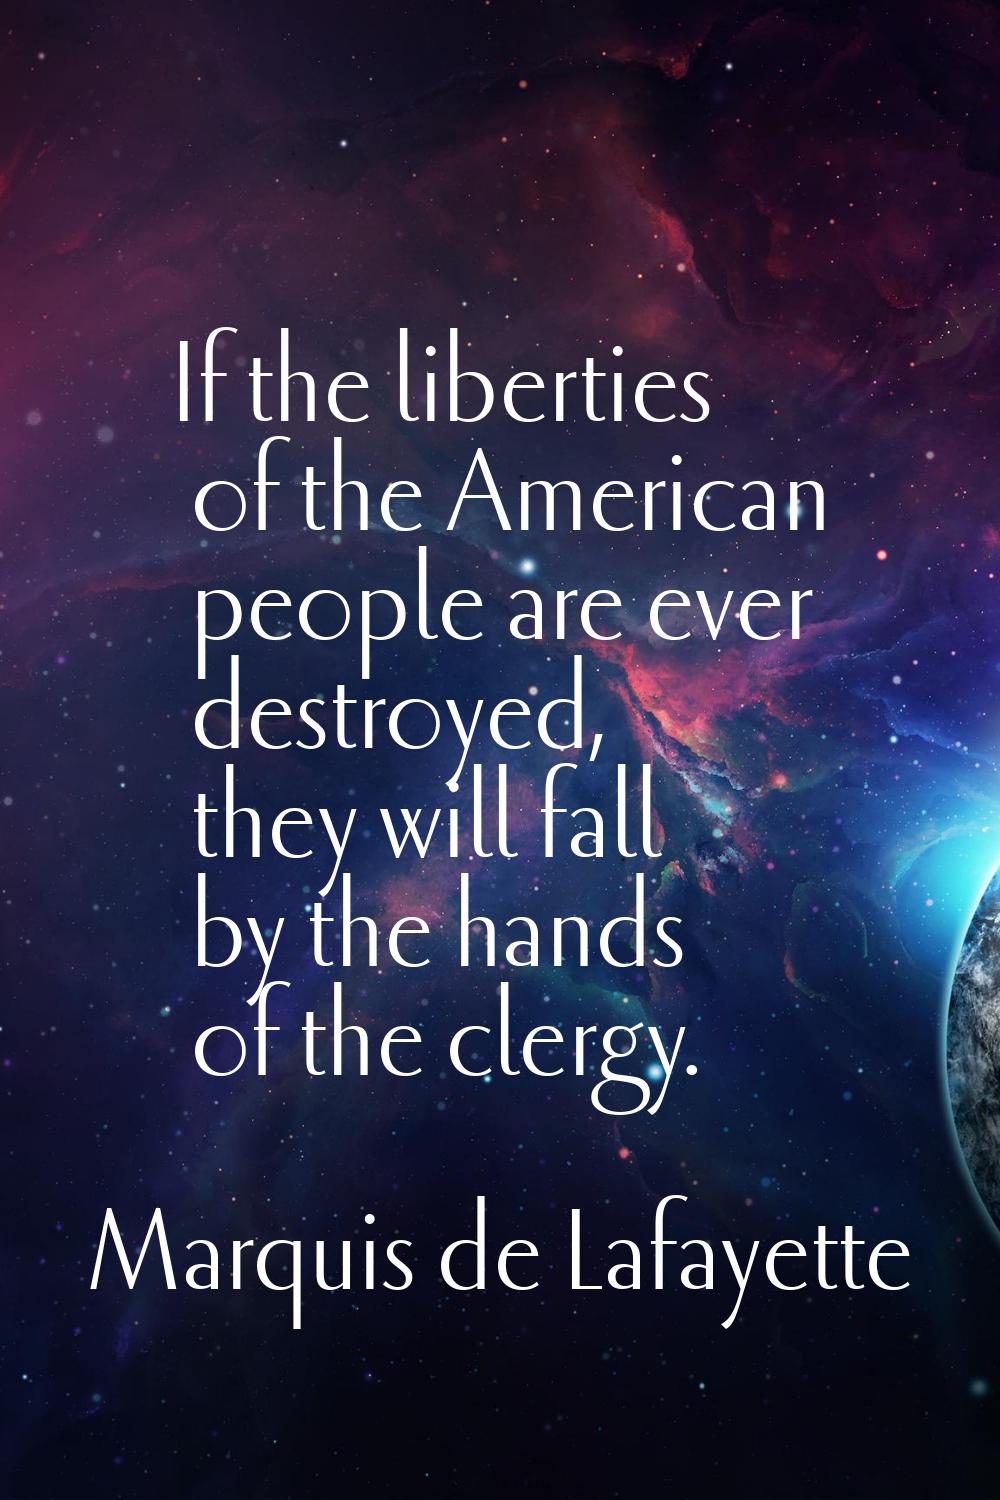 If the liberties of the American people are ever destroyed, they will fall by the hands of the cler